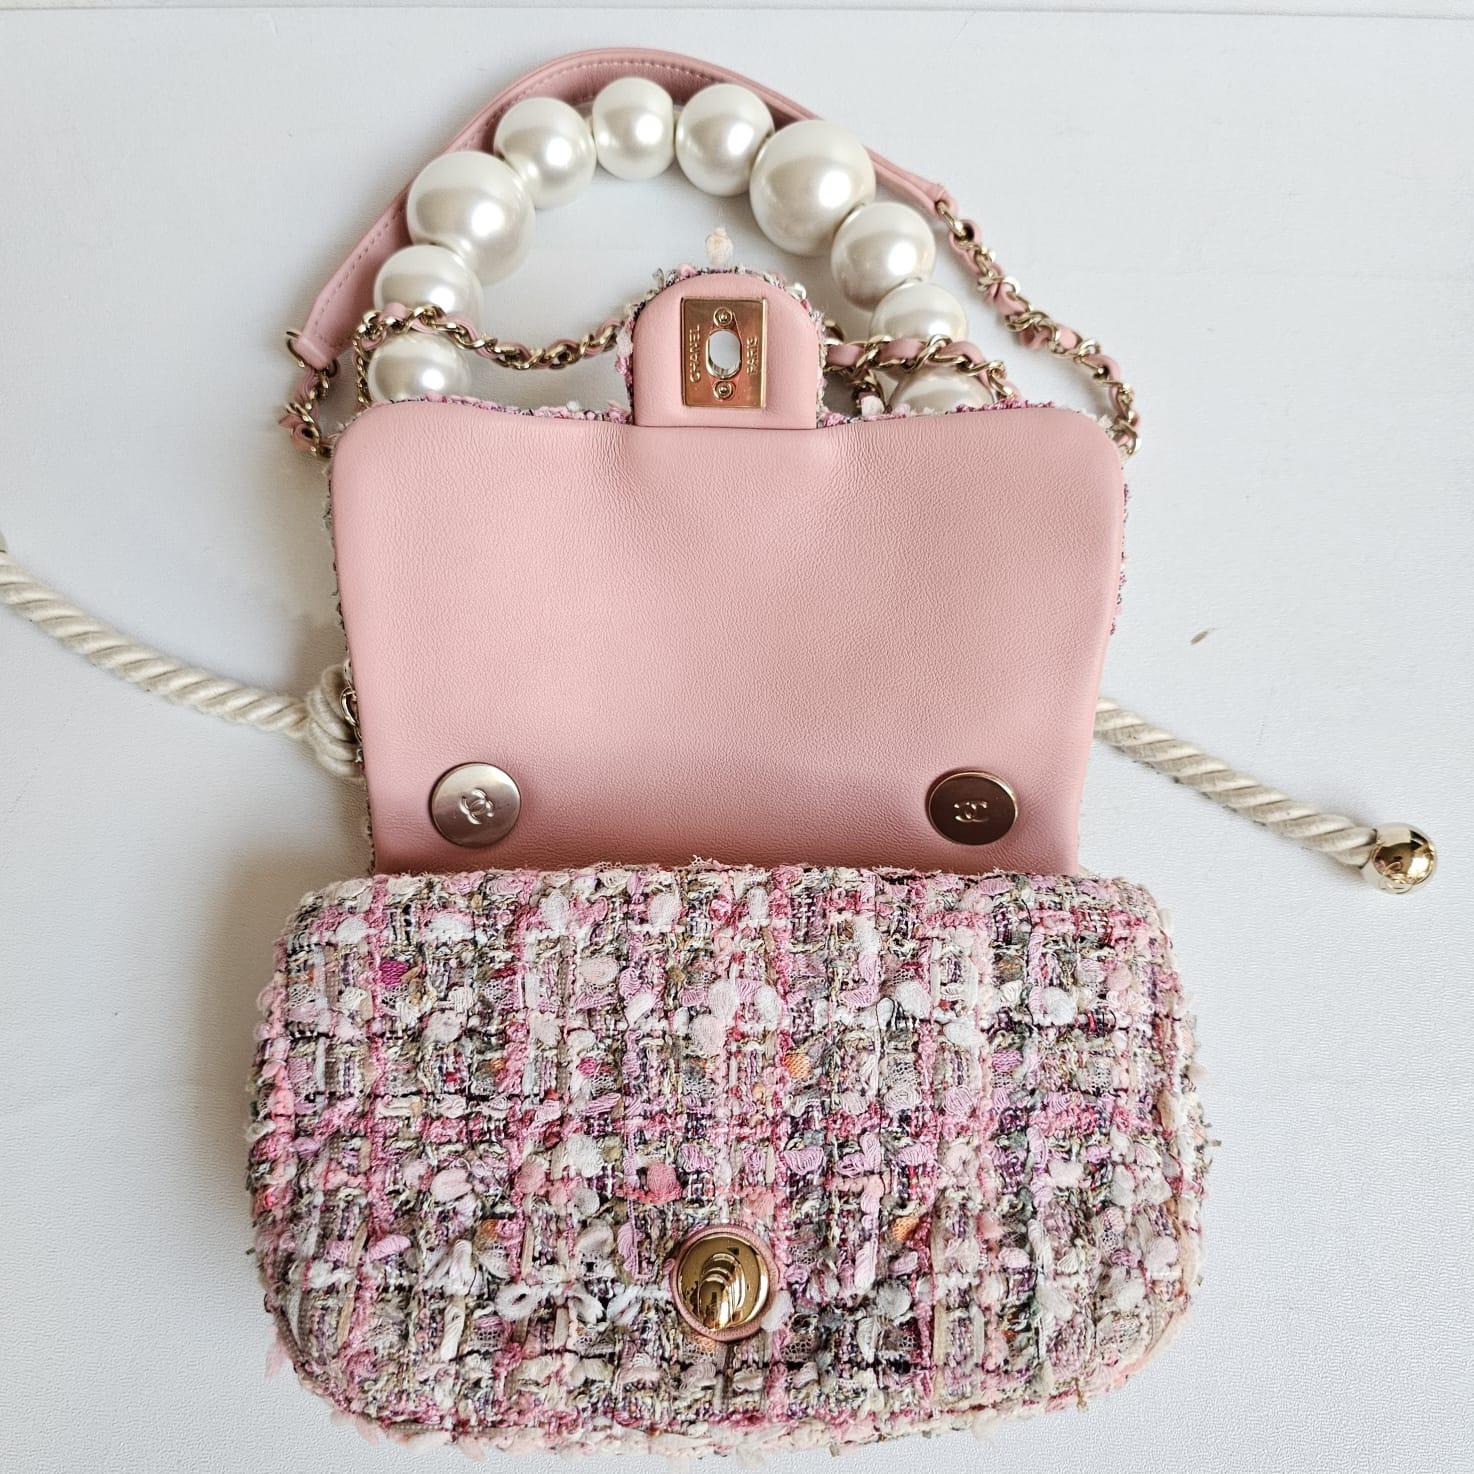 Chanel Mini Pink Tweed By The Sea Pearl Strap Flap Bag For Sale 3